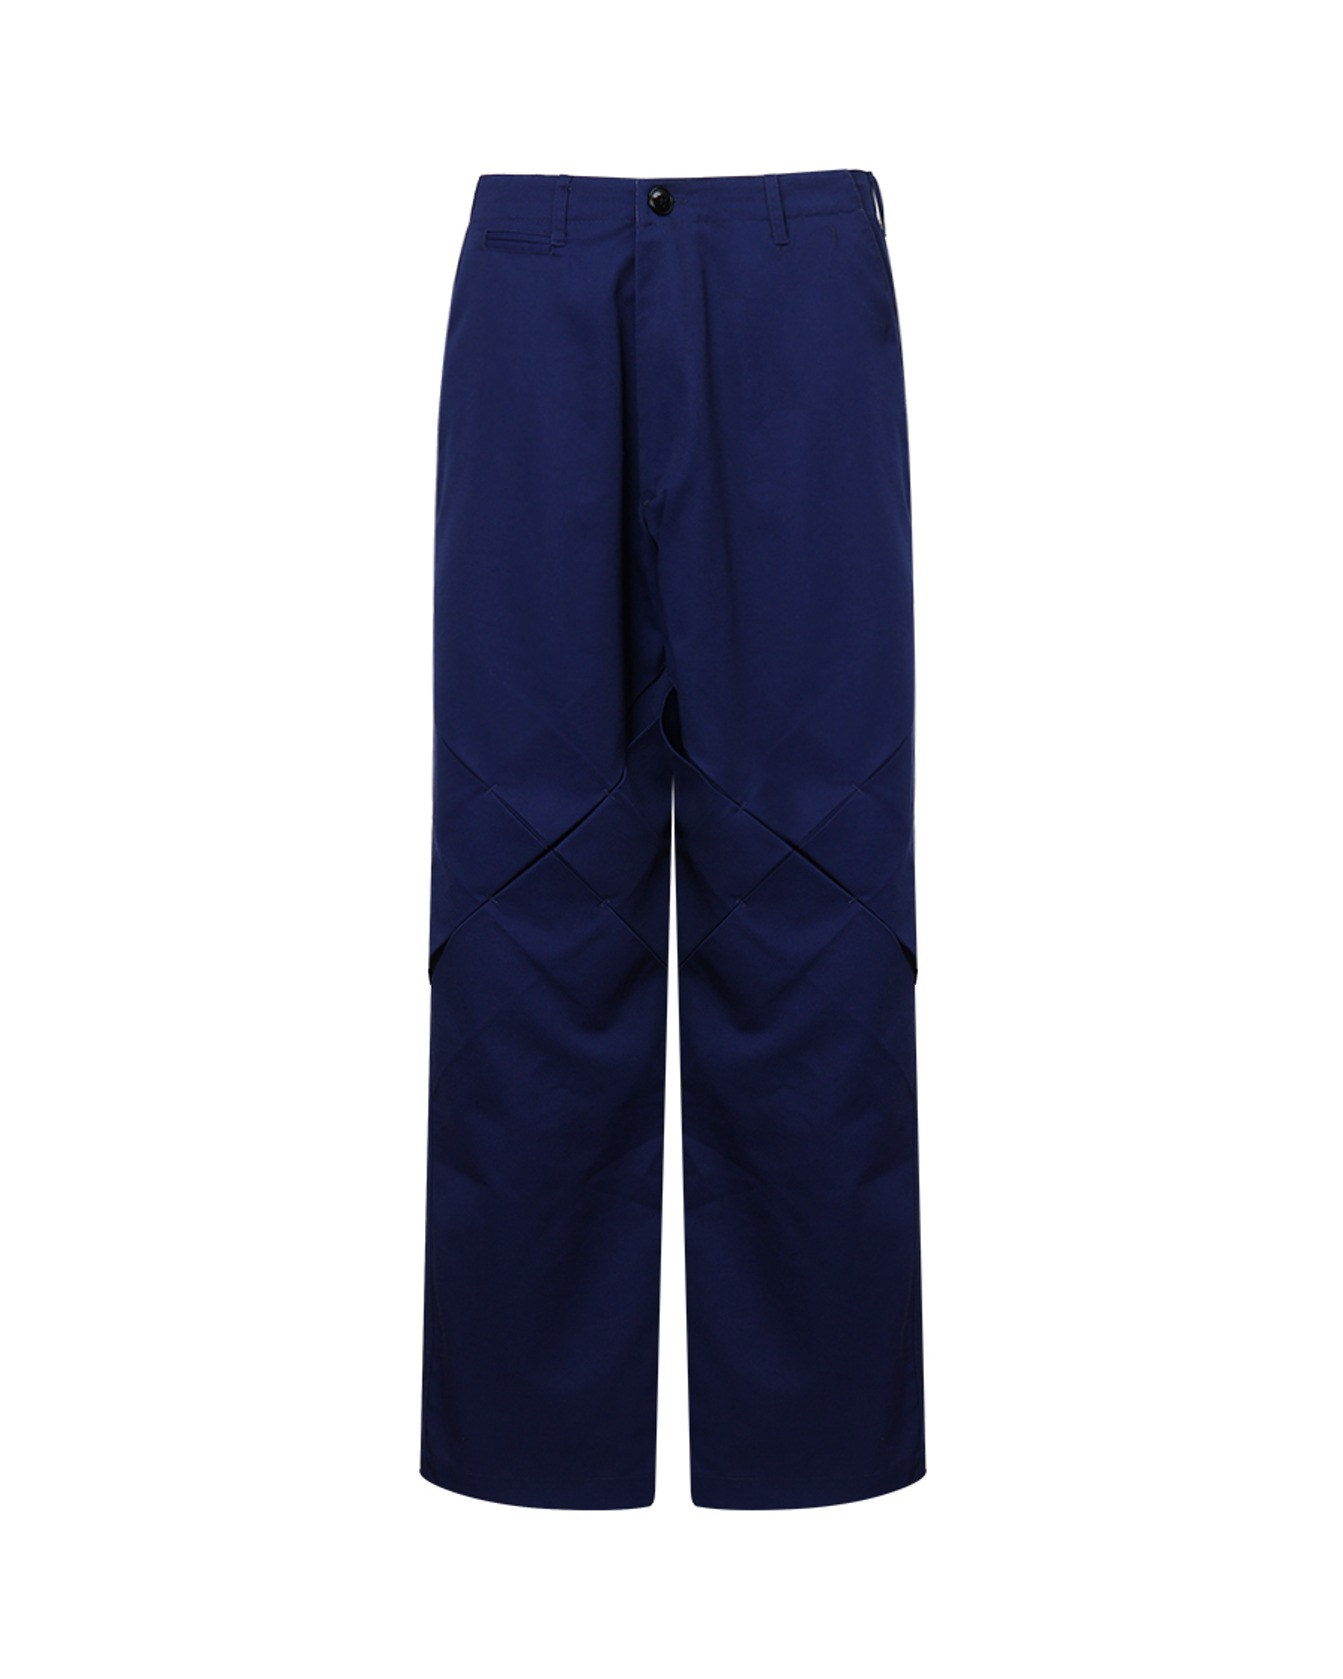 X FRENCH TROUSERS(wached blue)